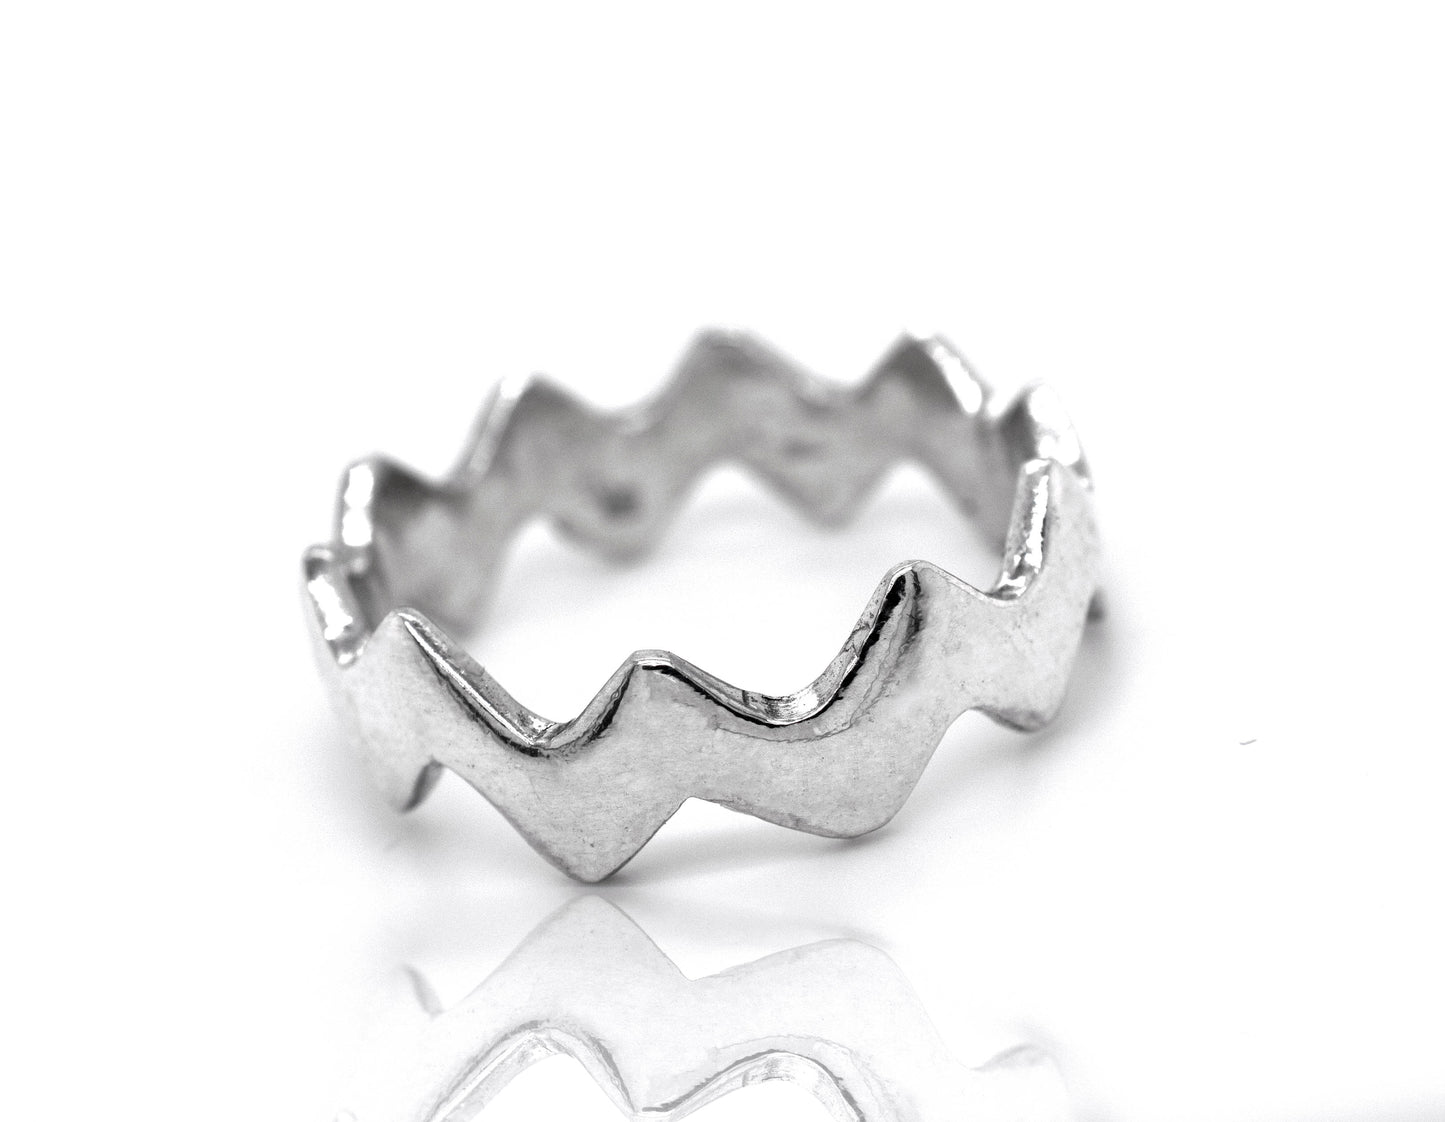 A durable and stylish Modern Zig-Zag Ring.